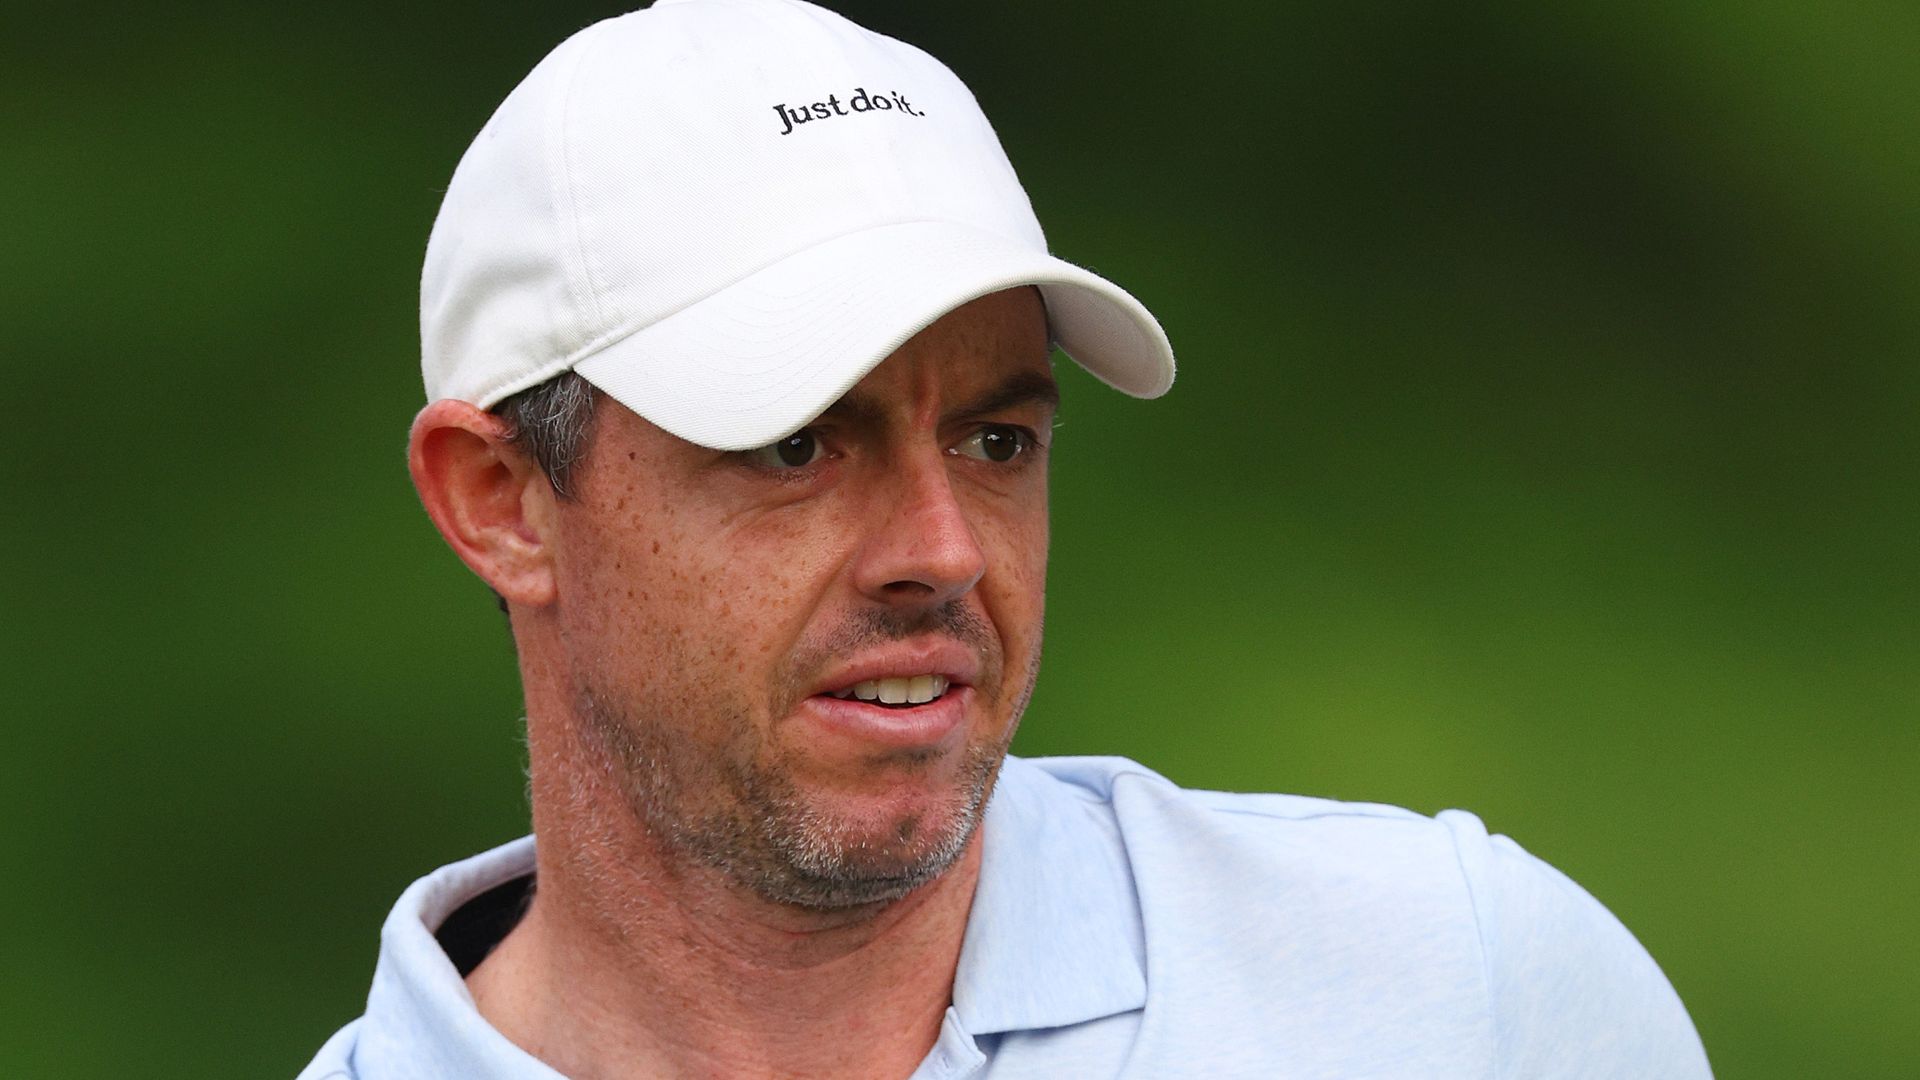 McIlroy misses out on PGA Tour board return: 'It got pretty messy'